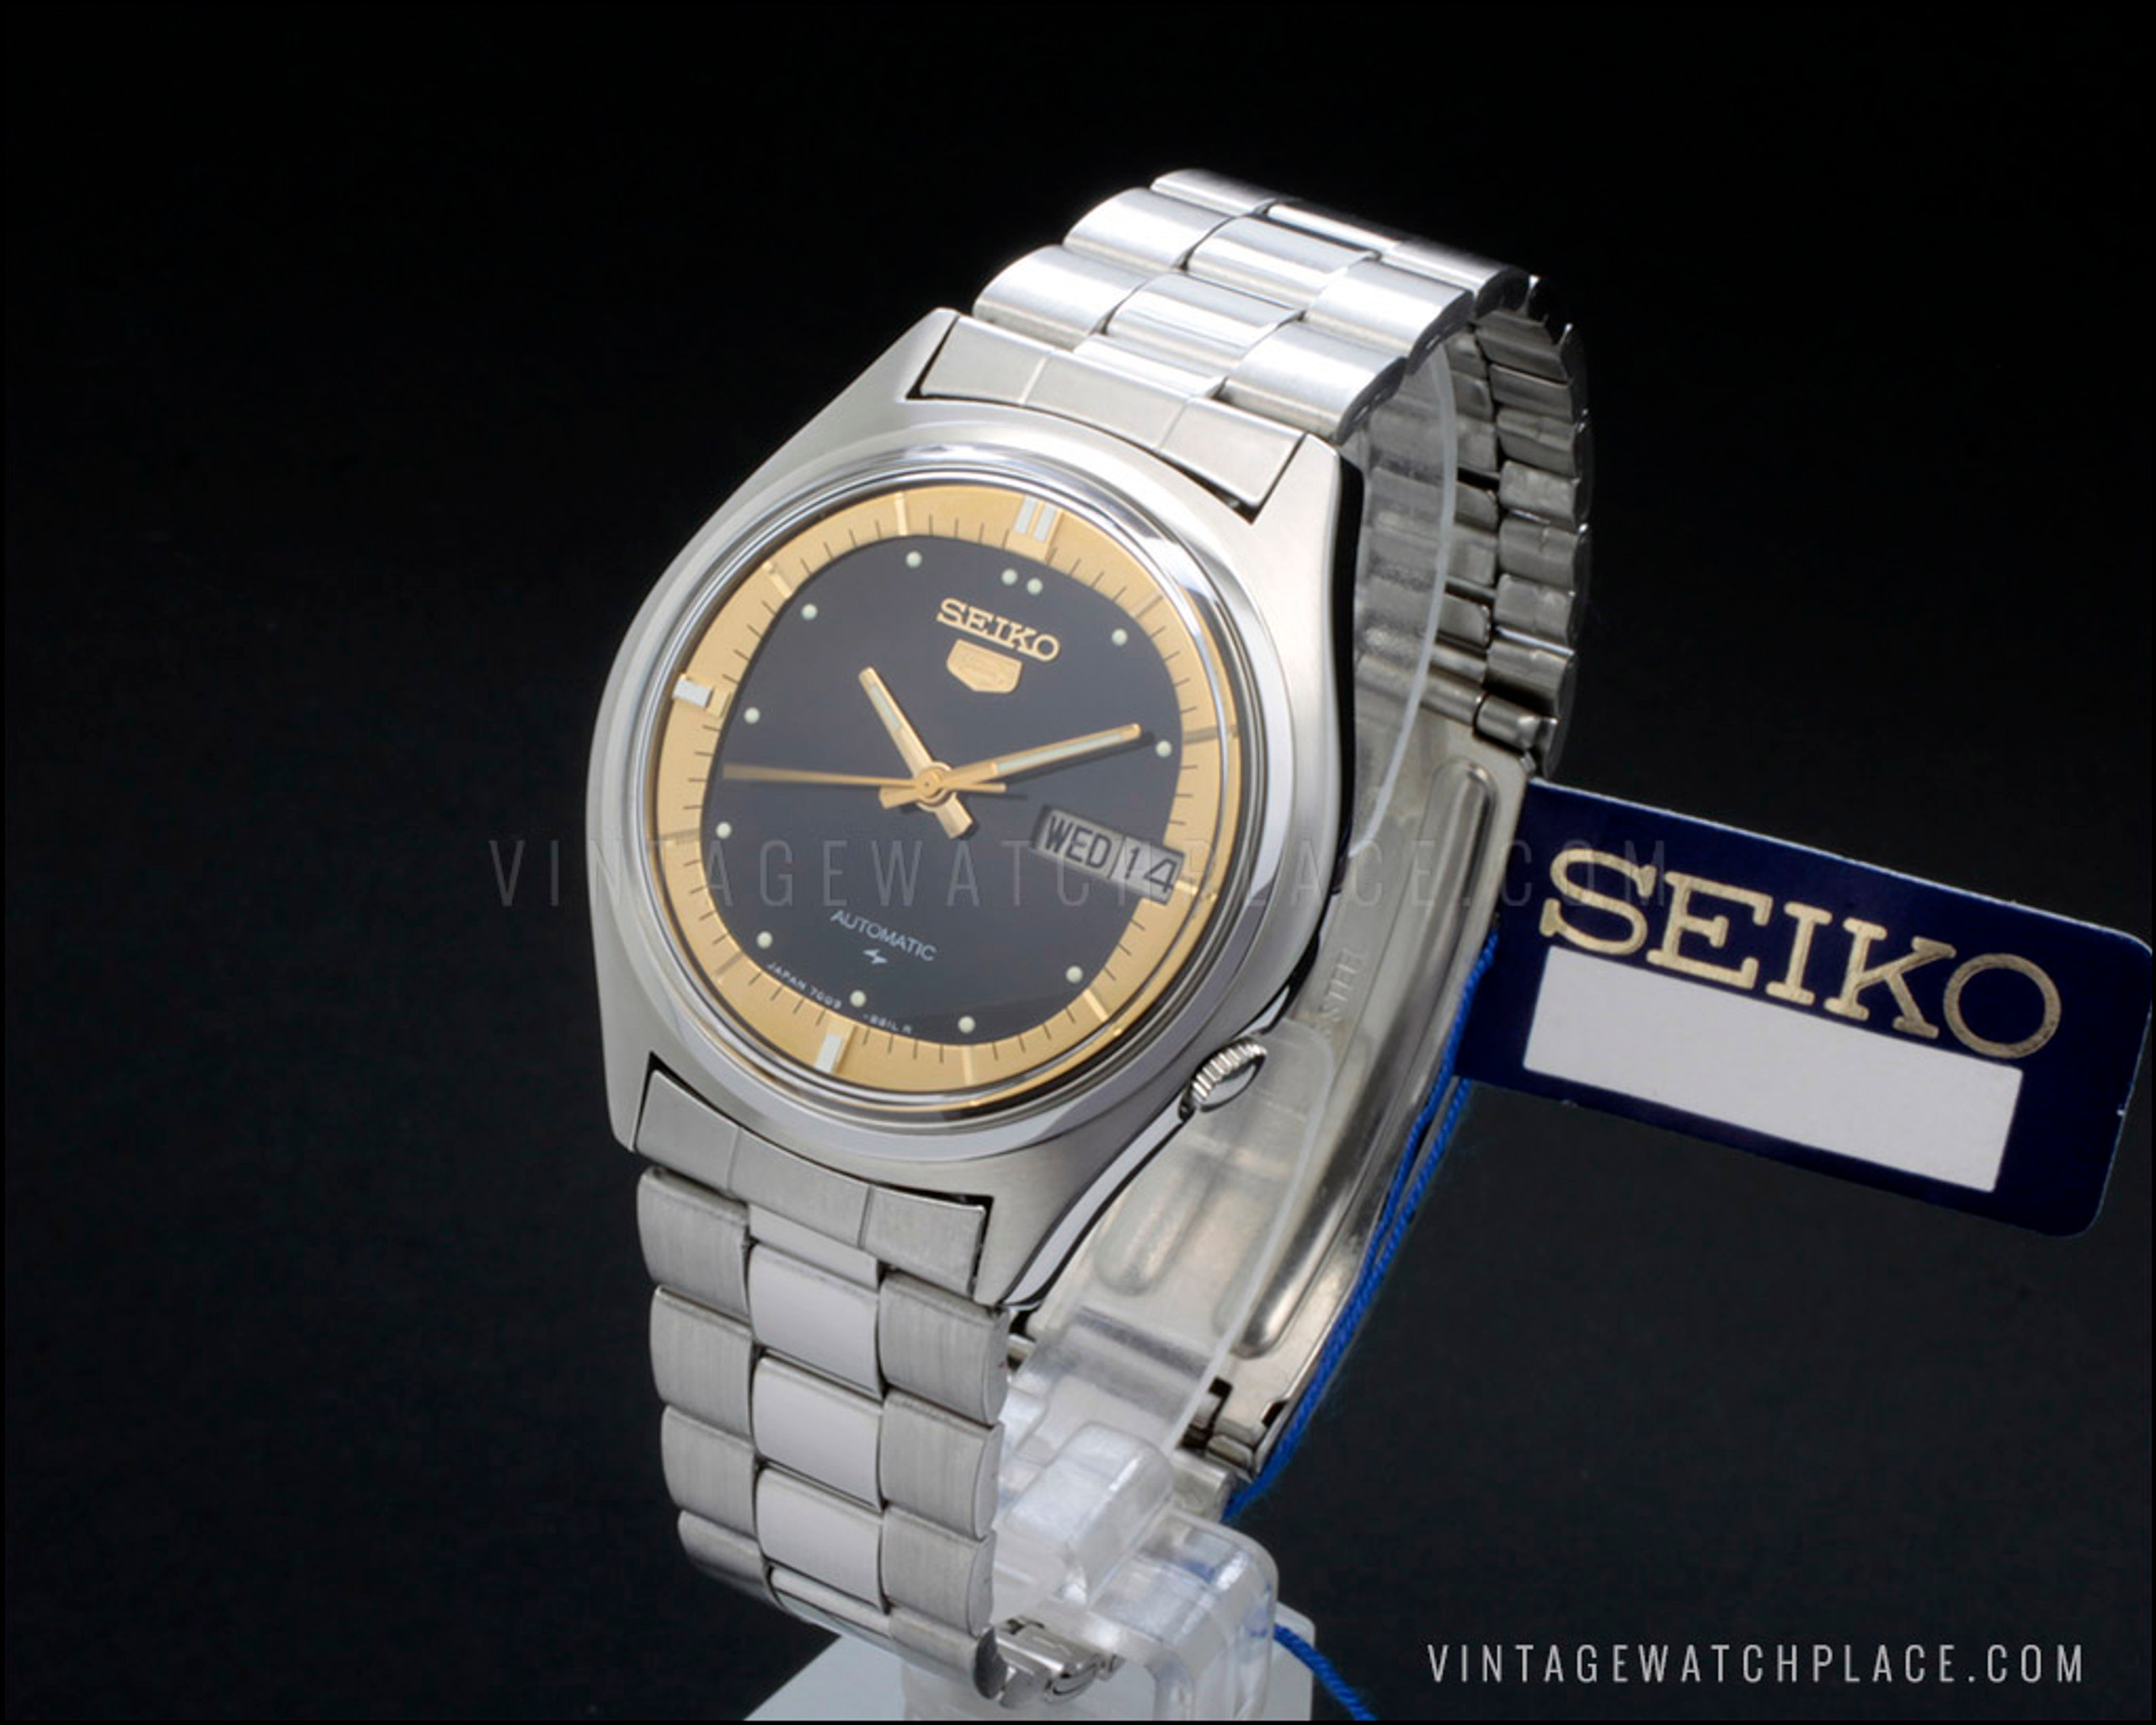 New Old Stock Seiko 5 automatic vintage watch, 7009-8020, casual ...